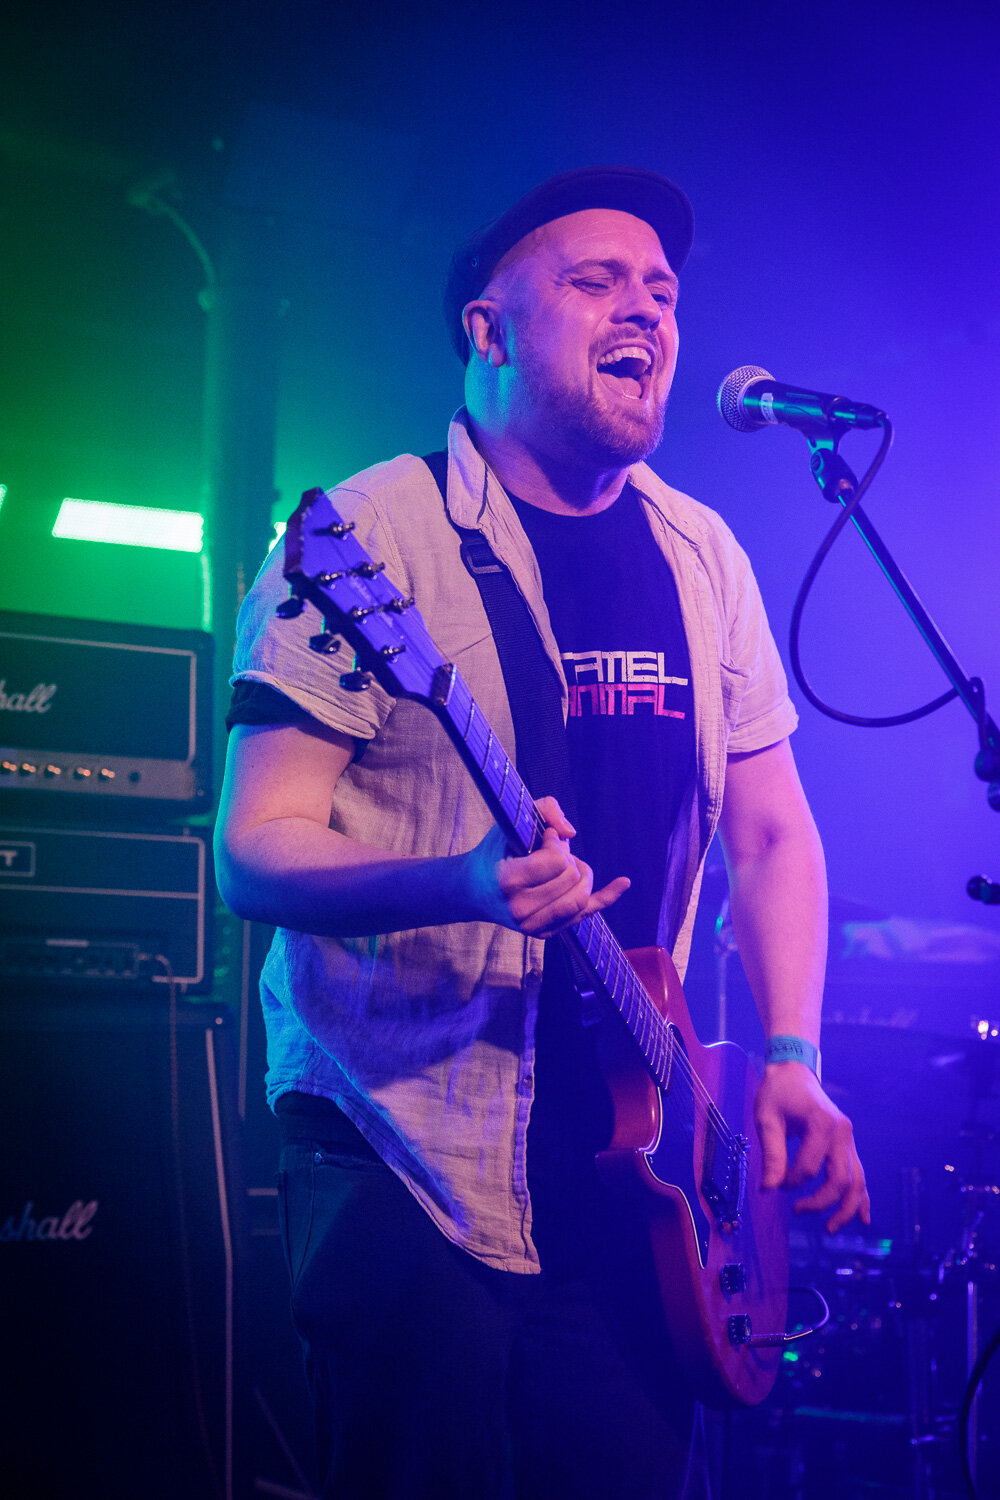 Mr Ted at the O2 Academy 2 in Liverpool on March 12th 2020